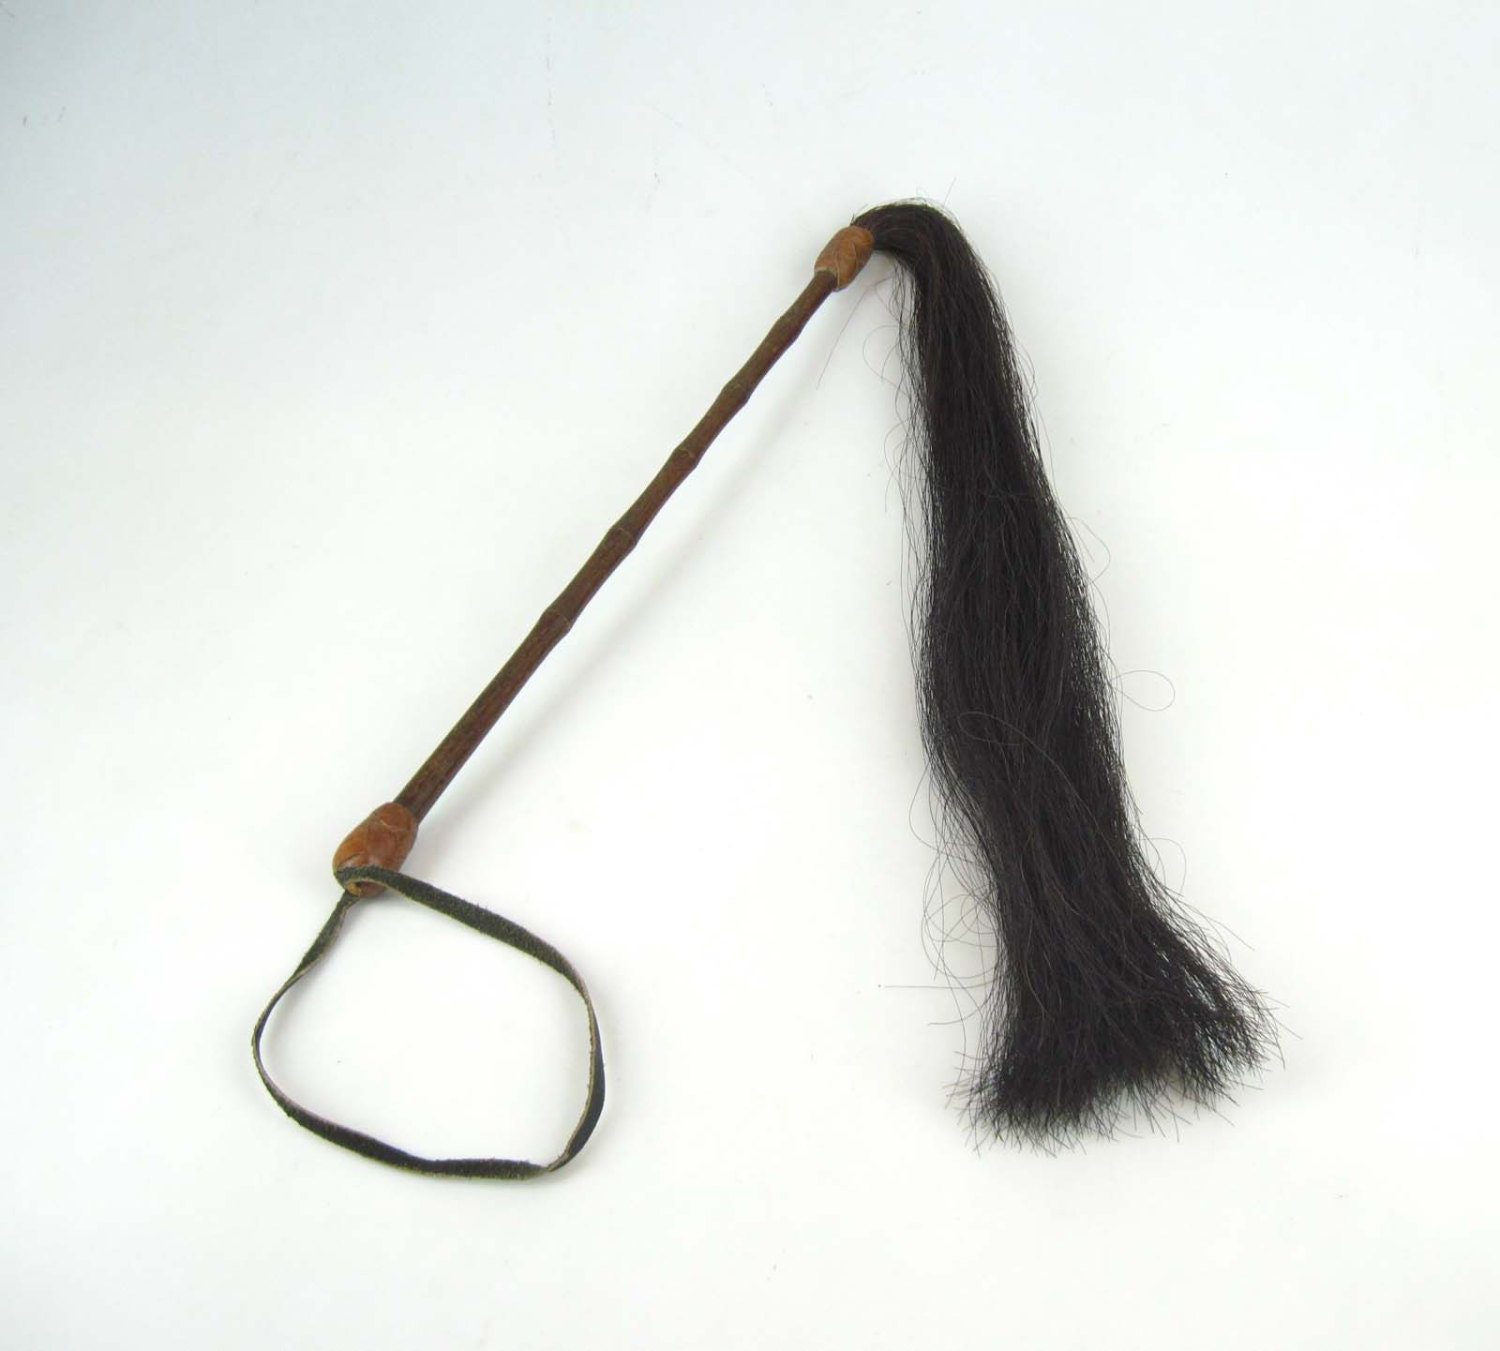 Vintage Equestrian Riding Quirt / Crop / Fly Wisk with Horsehair Horse Tail Hair - DrStrangeGoods